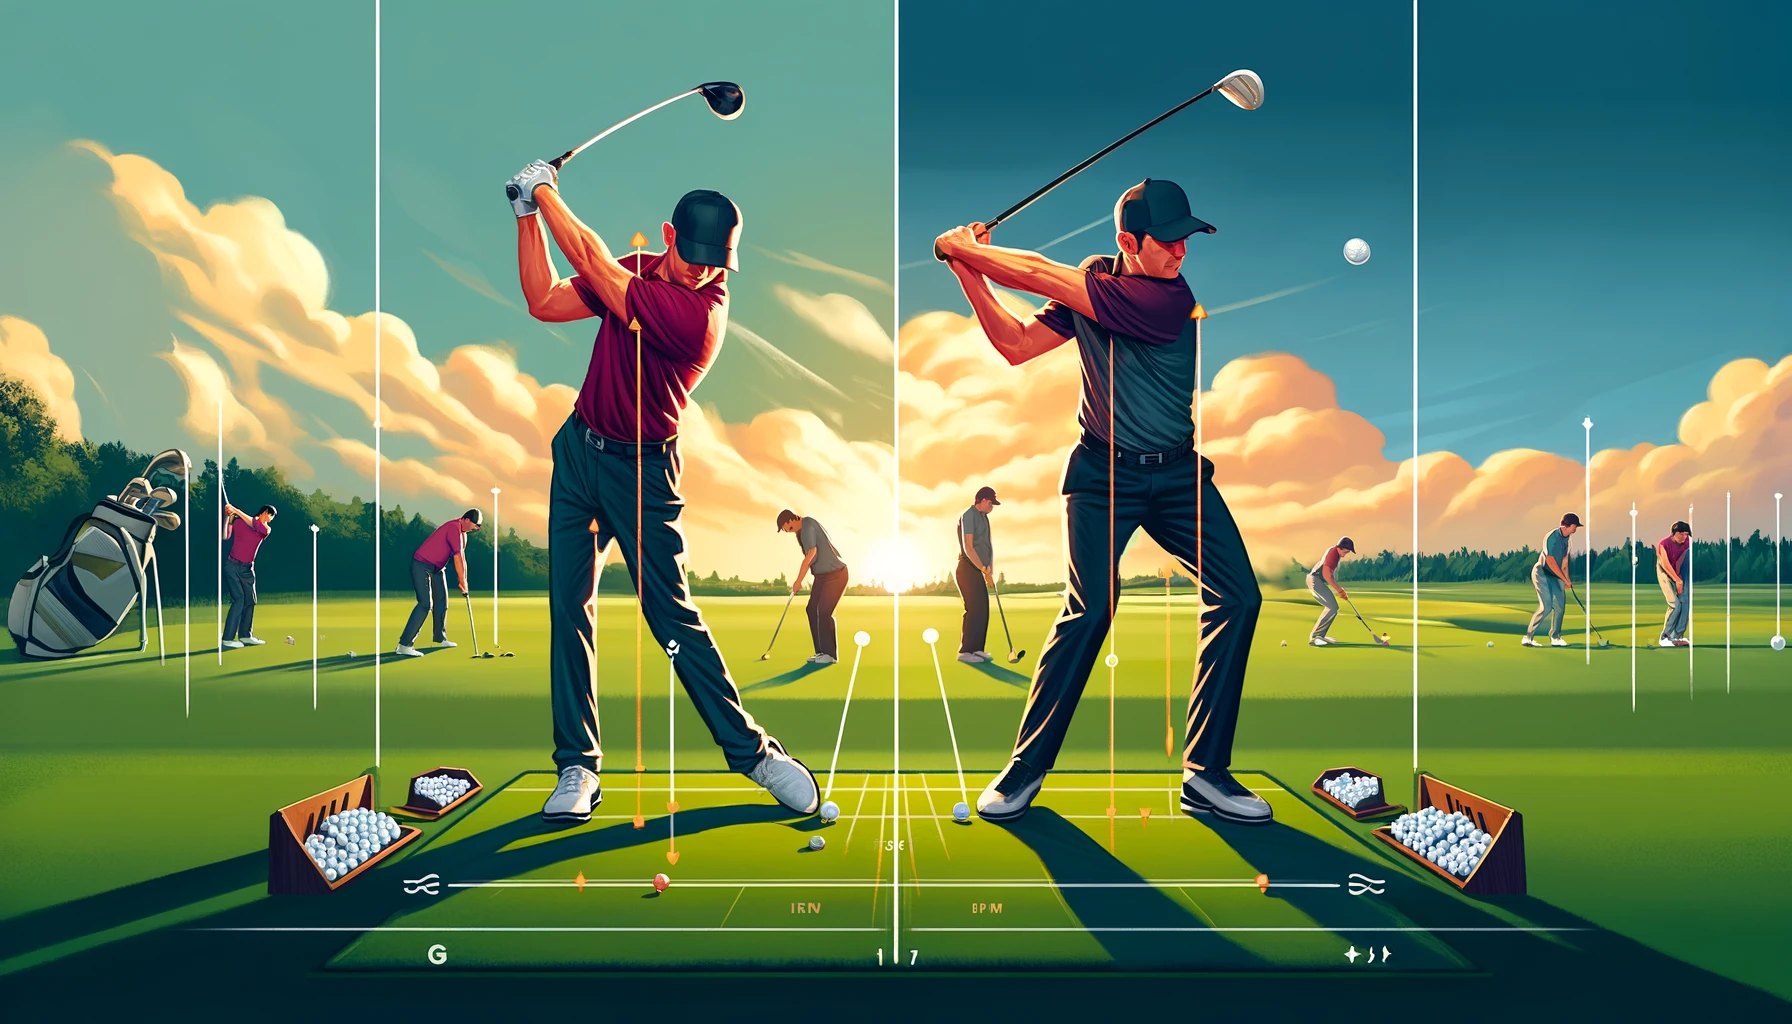 Driver vs Iron – DIFFERENCES IN THE GOLF SWING ADVANCED